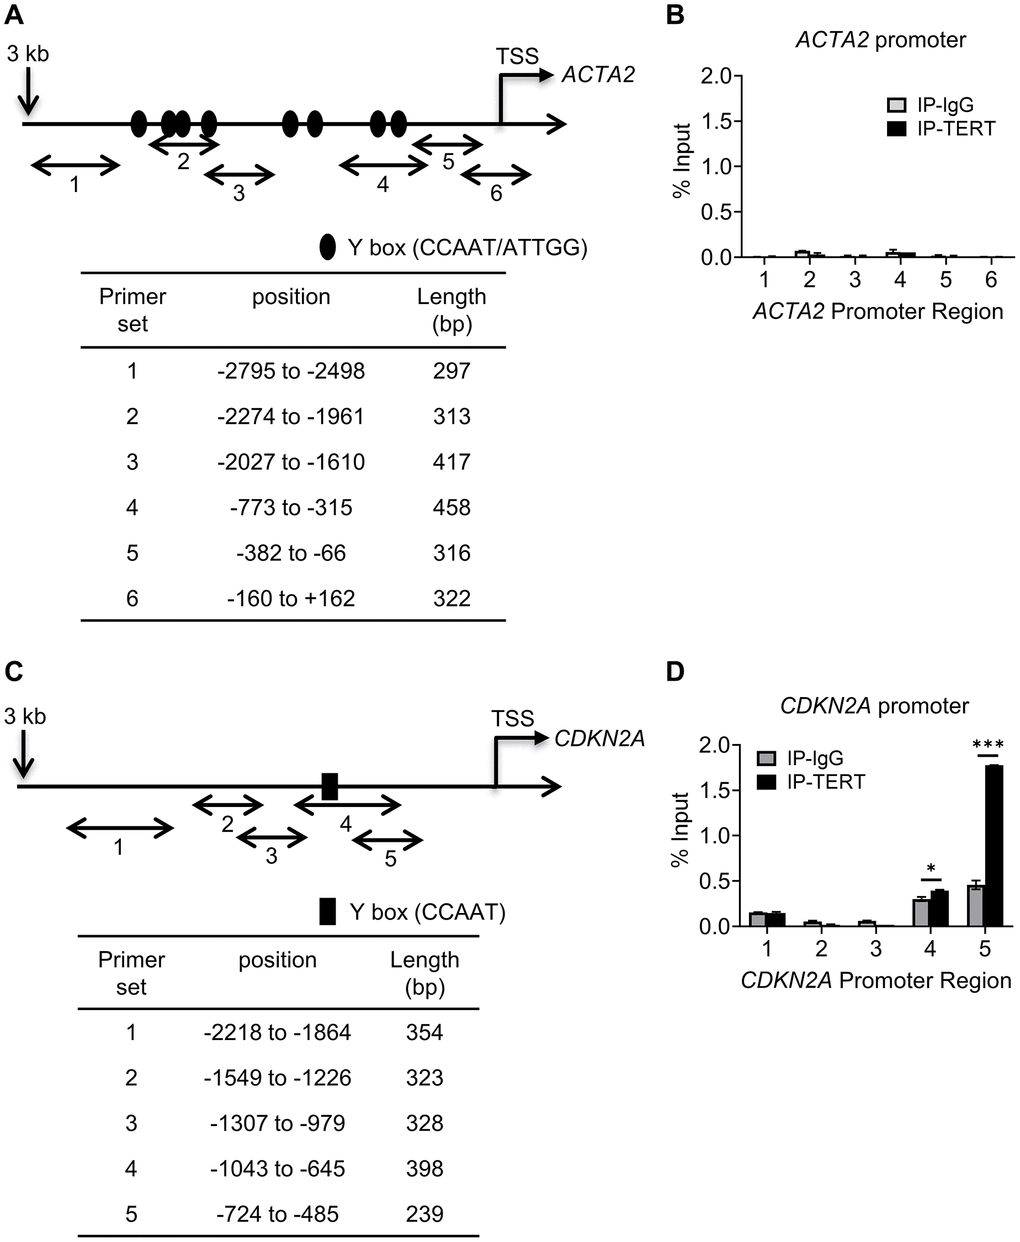 TERT binding to CDKN2A but not to ACTA2 promoter. Schematic illustration of ACTA2 (A) and CDKN2A (C) promoters are shown. PCR primers for ChIP assays are indicated by numbered bidirectional arrows, with their positions and lengths listed in the respective tables below the illustrations in (B) and (D). ChIP assays to assess TERT binding to ACTA2 (B) or CDKN2A (D) promoter in BJ5ta cells were performed using primers as numbered in (A) and (C), respectively. The cell DNA immunoprecipitated by YB-1 antibody was amplified by qPCR. One tenth of the supernatant before immunoprecipitation was used for the DNA input control. Results are expressed as % of input. N = 3 each group. *P ***P 